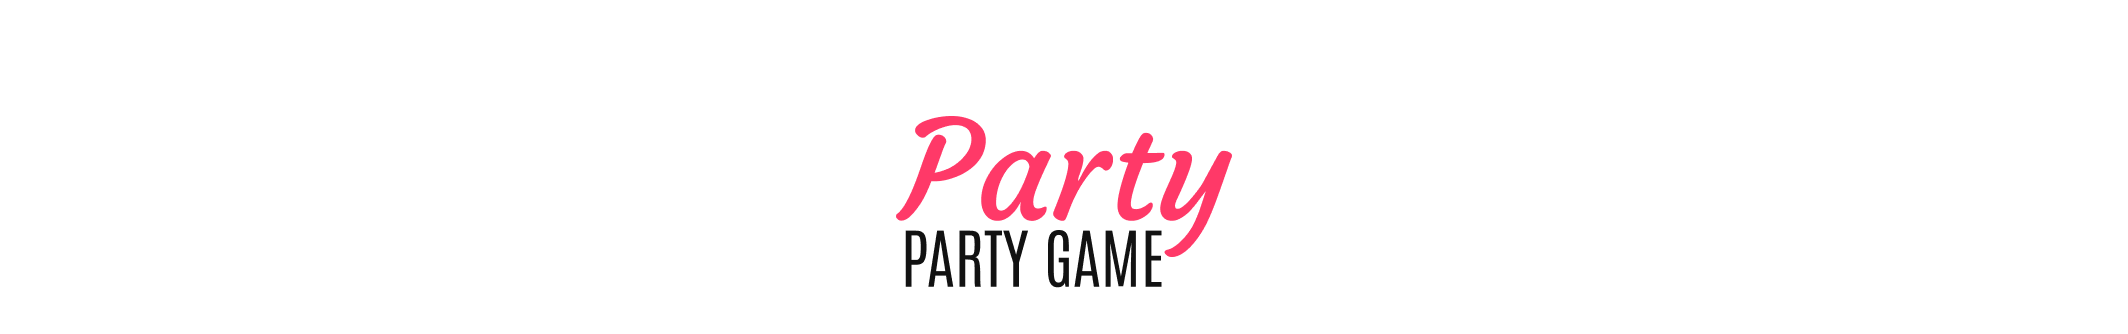 Party Party Game